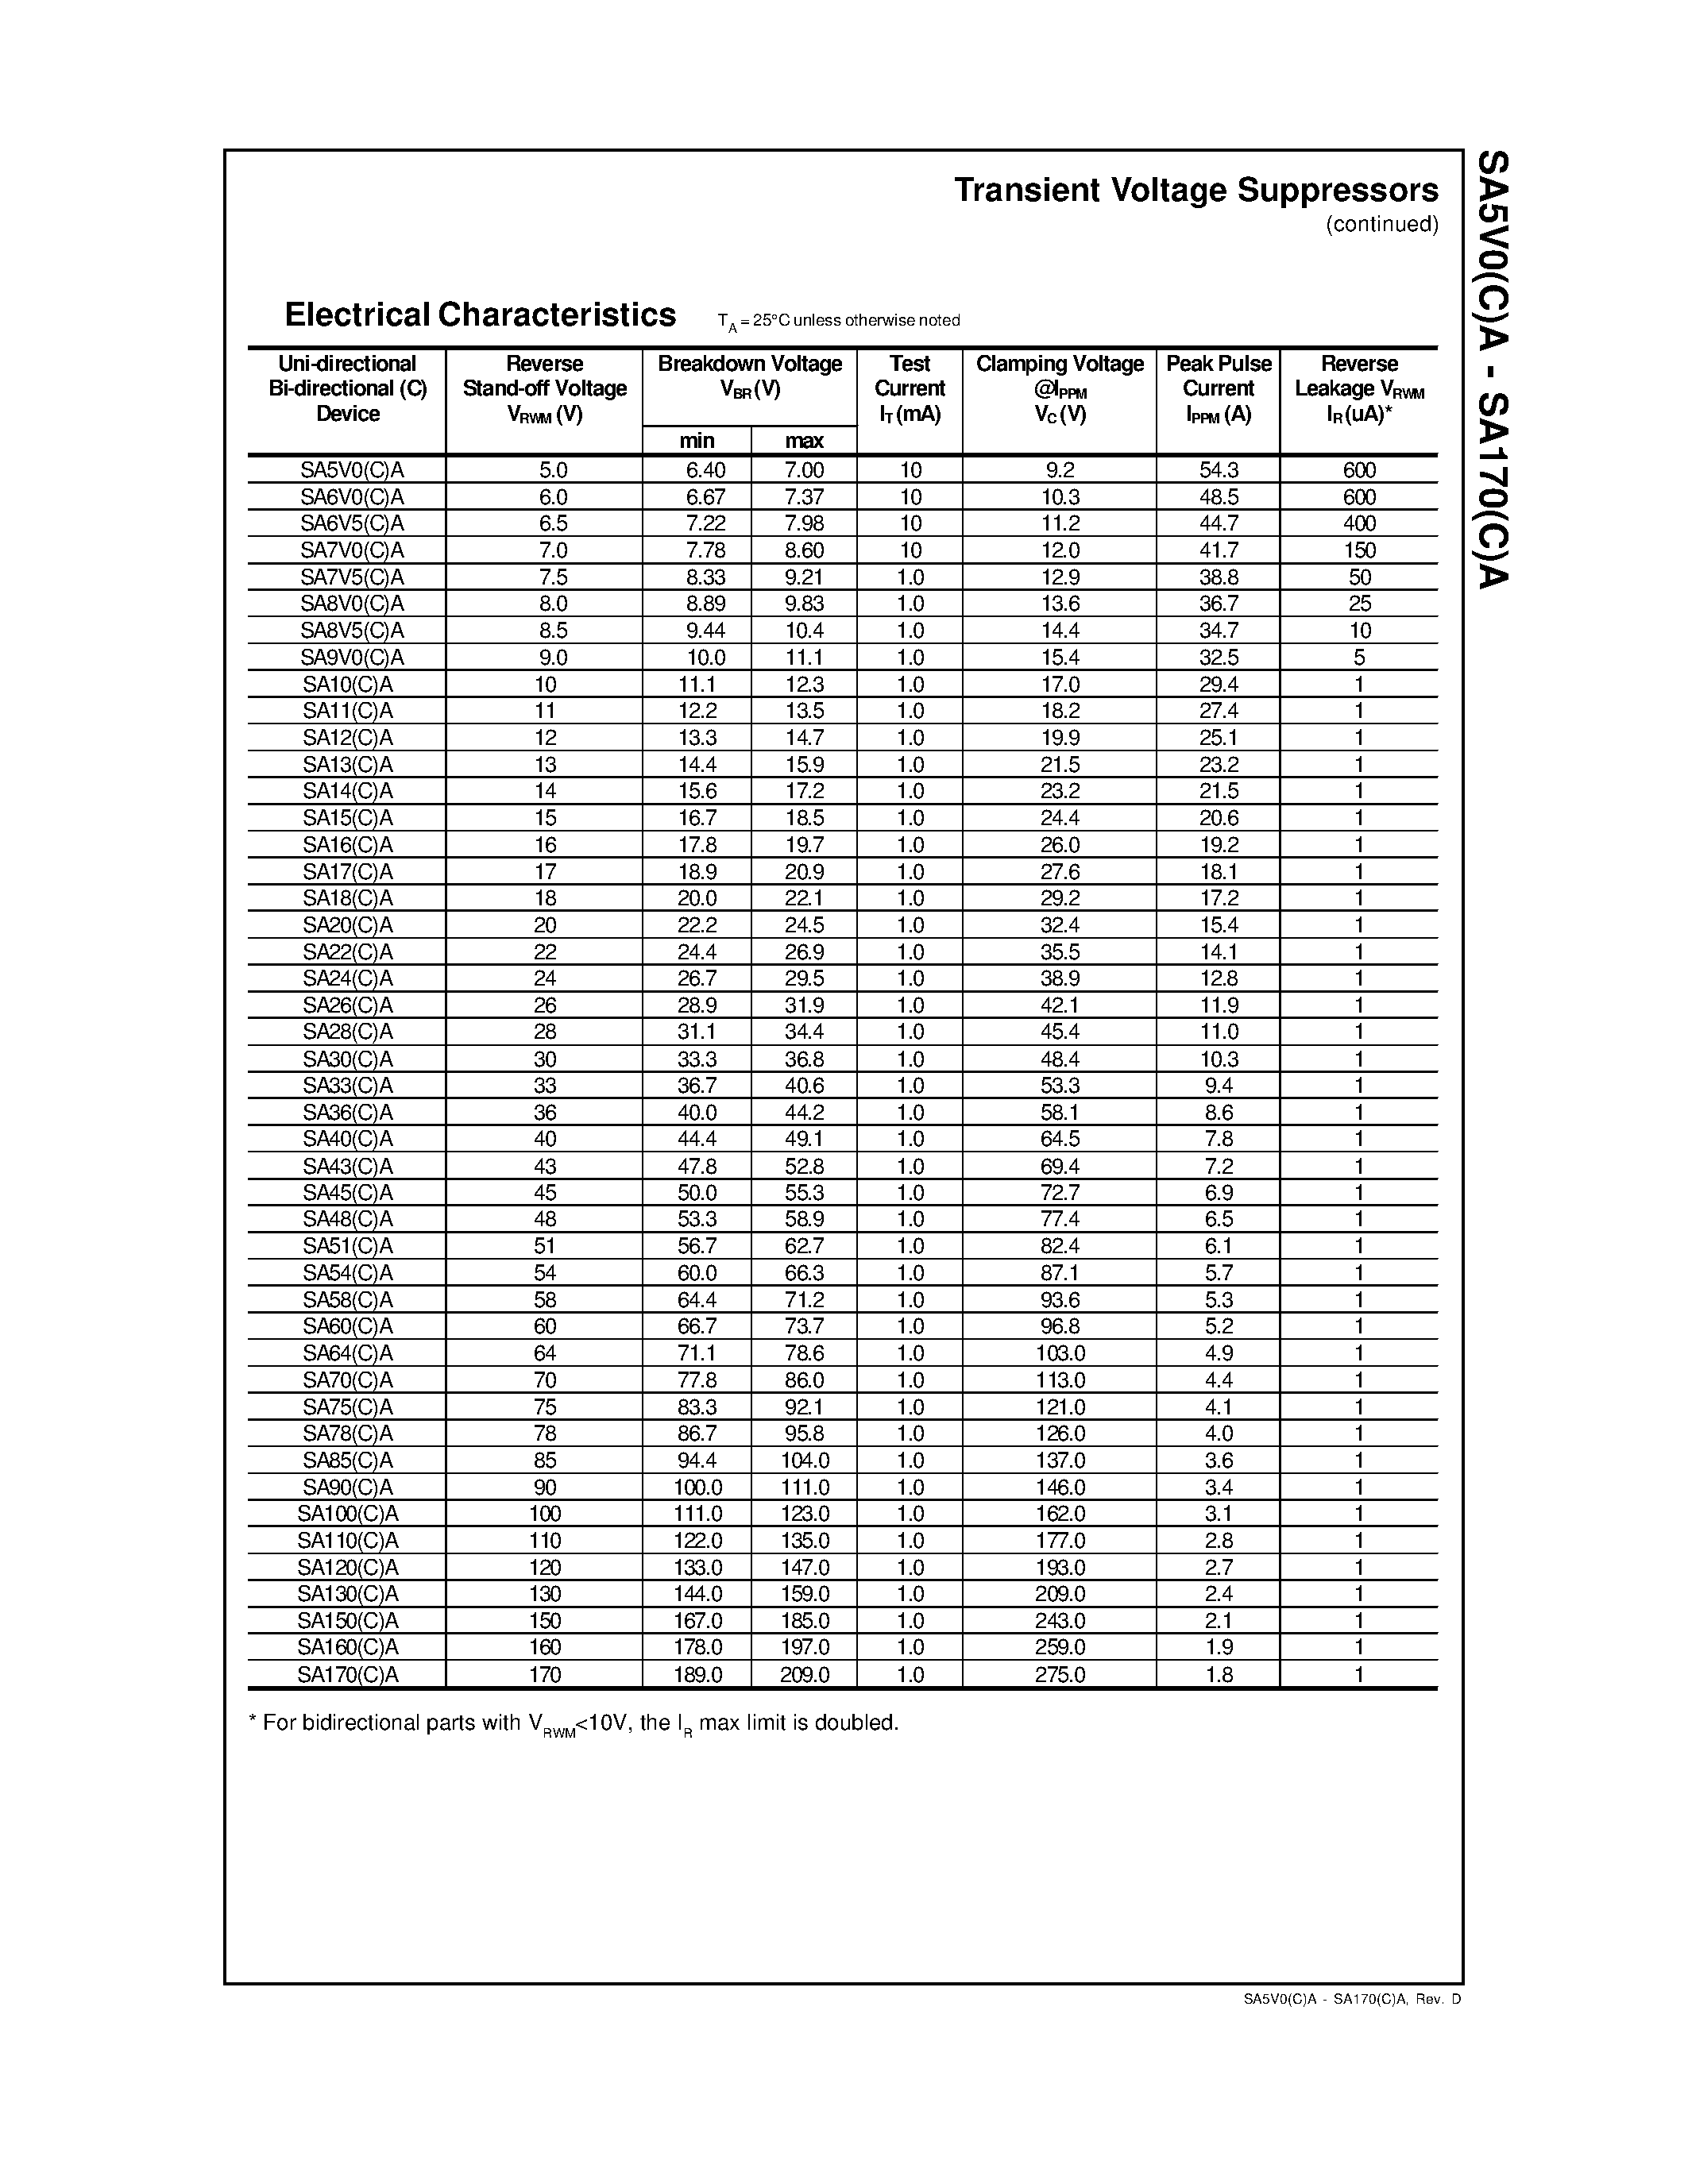 Datasheet SA100A - Transient Voltage Suppressors page 2